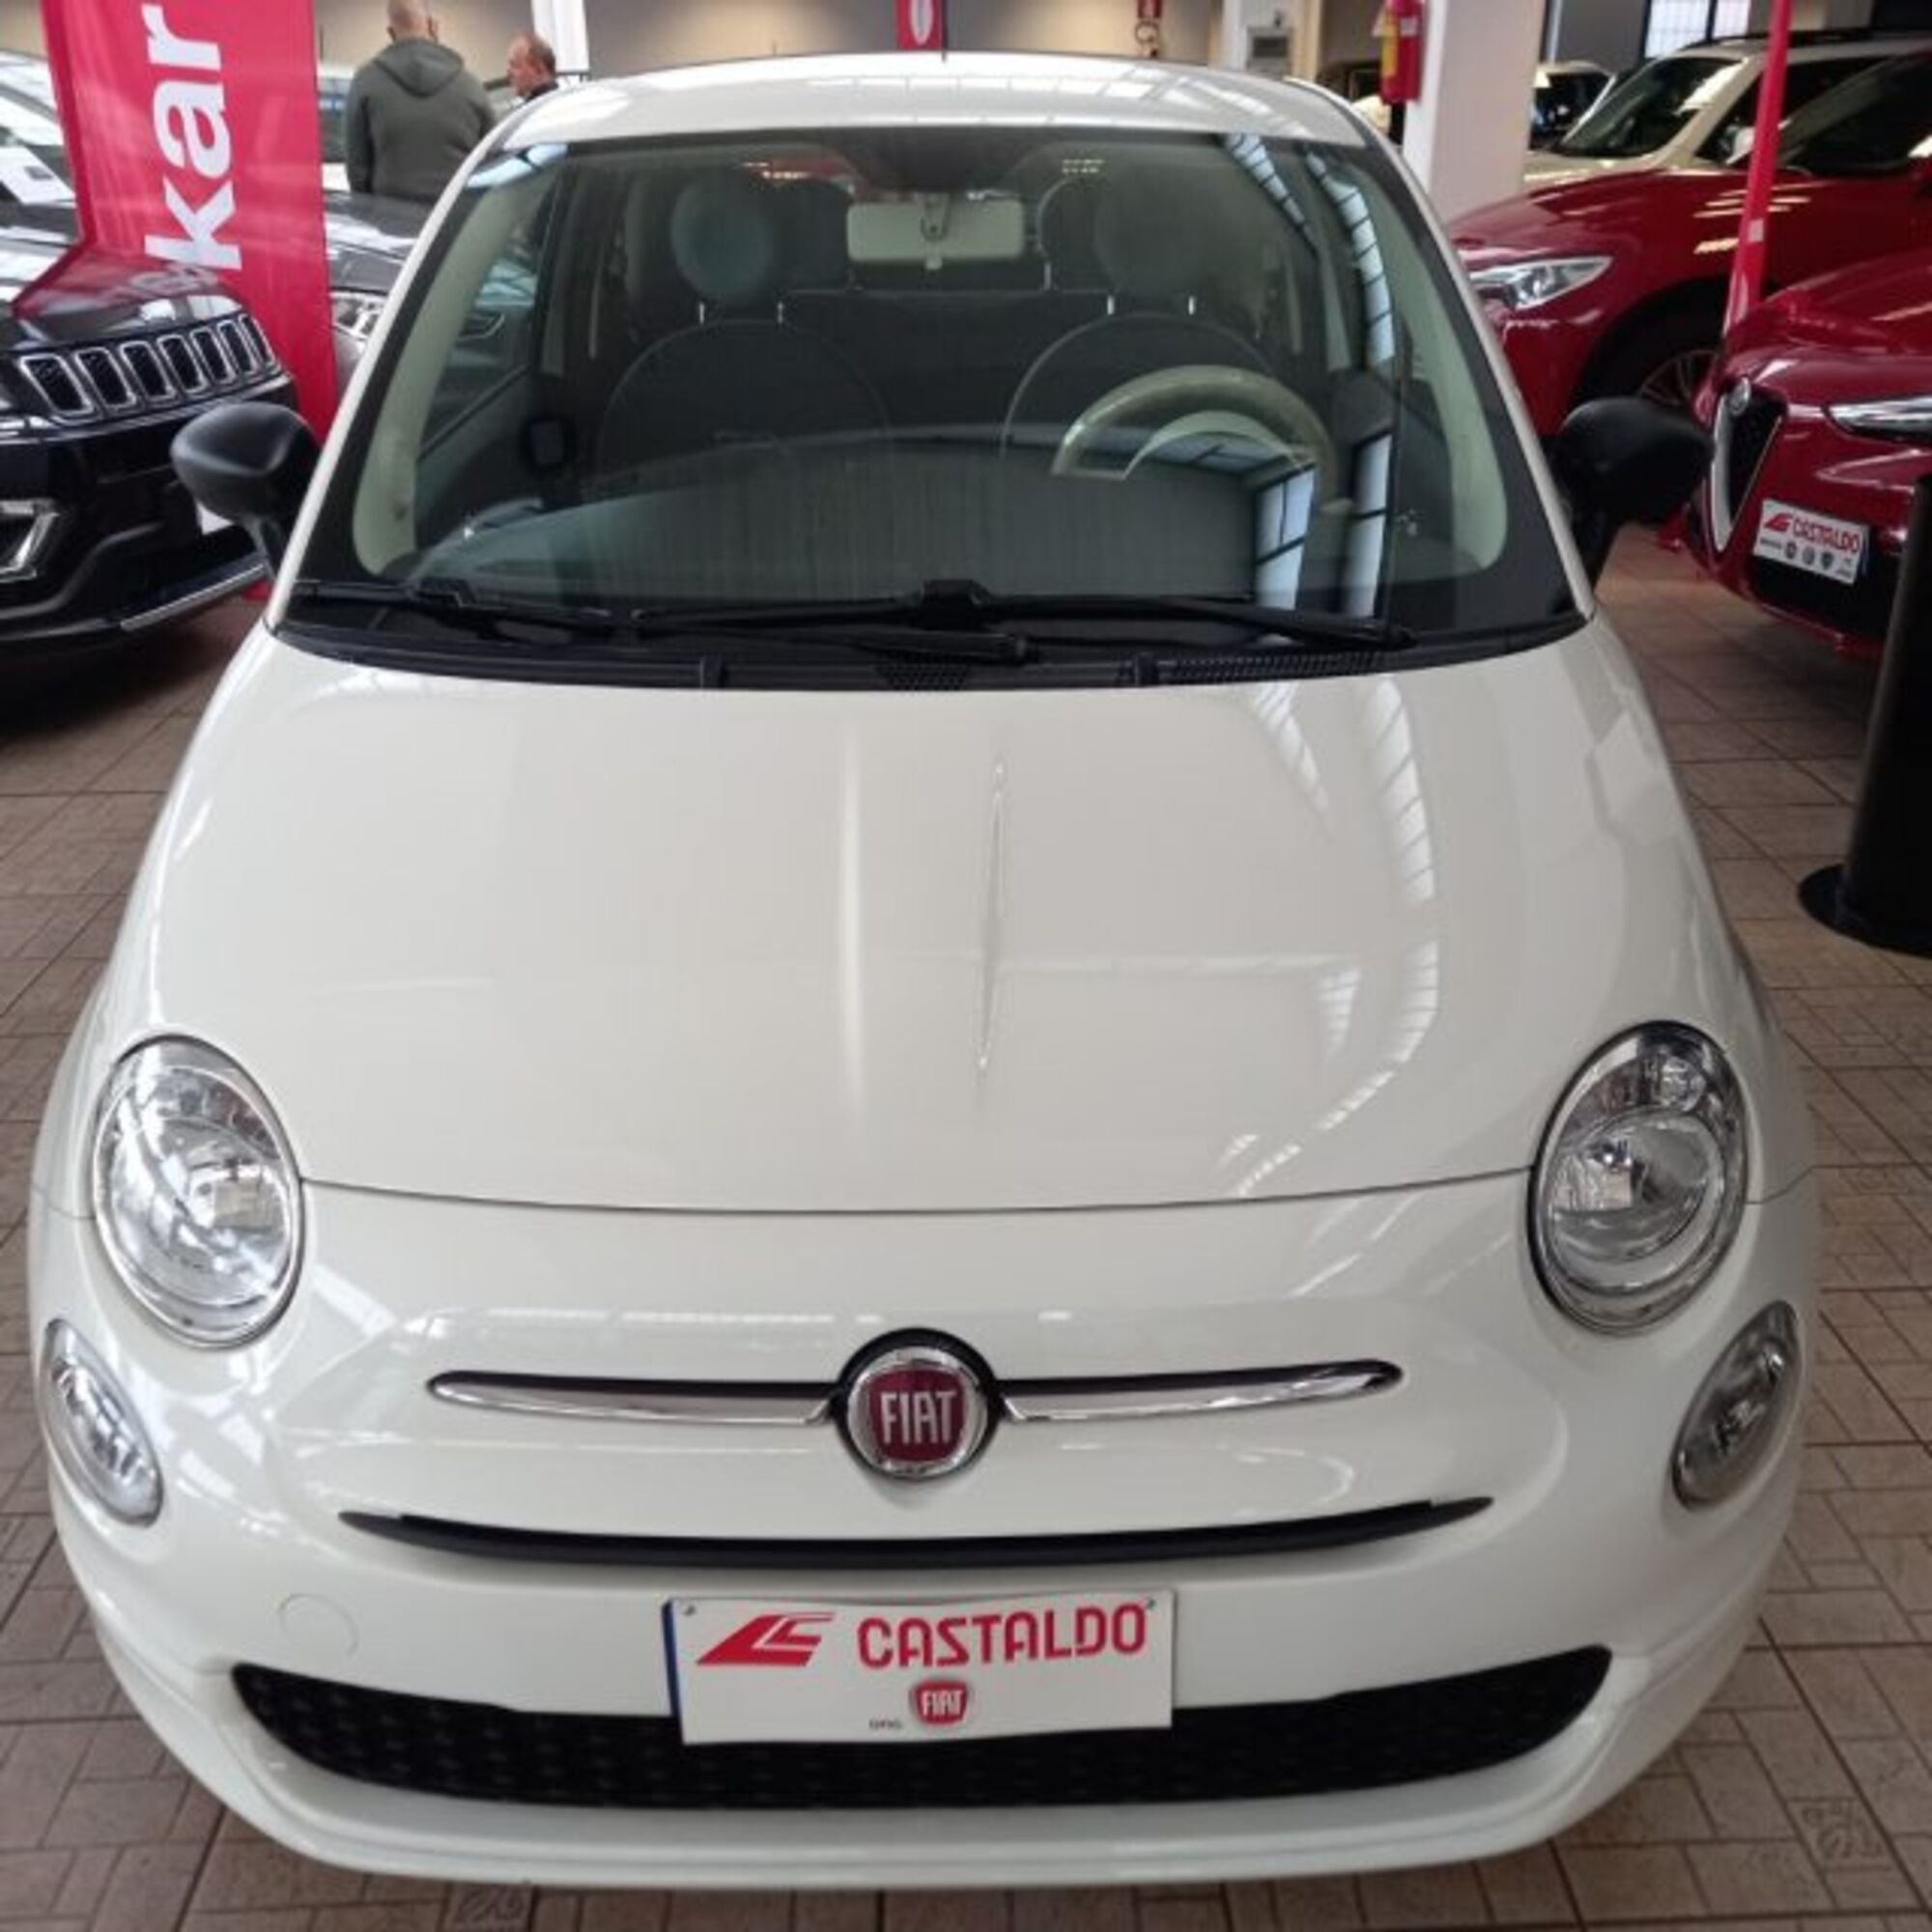 Fiat 500 1.2 by Gucci